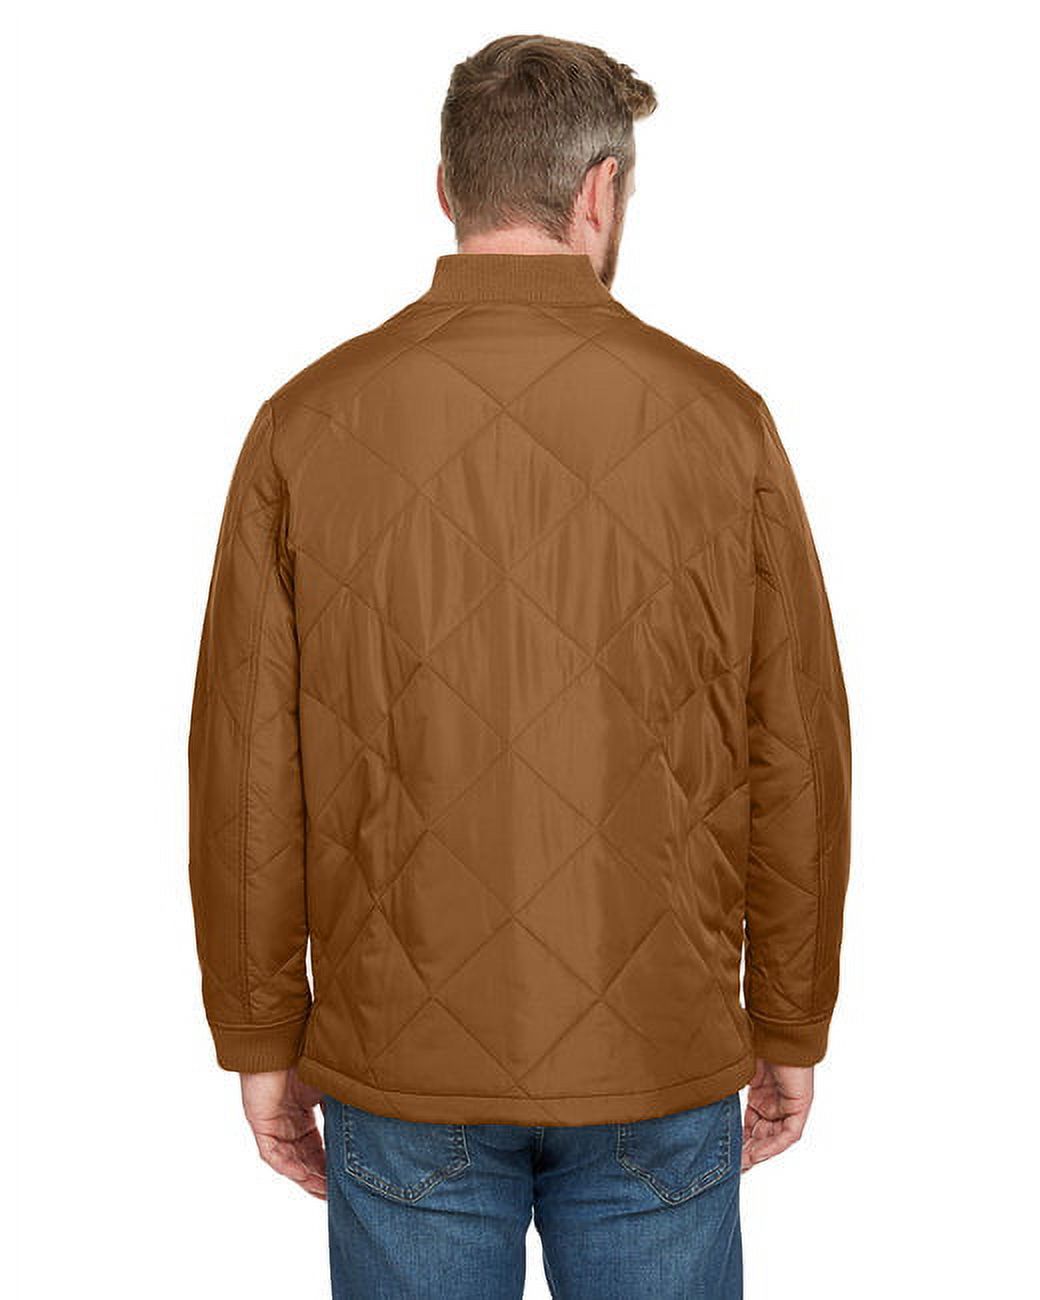 Adult Dockside Insulated Utility Jacket - DUCK BROWN - M - image 2 of 3